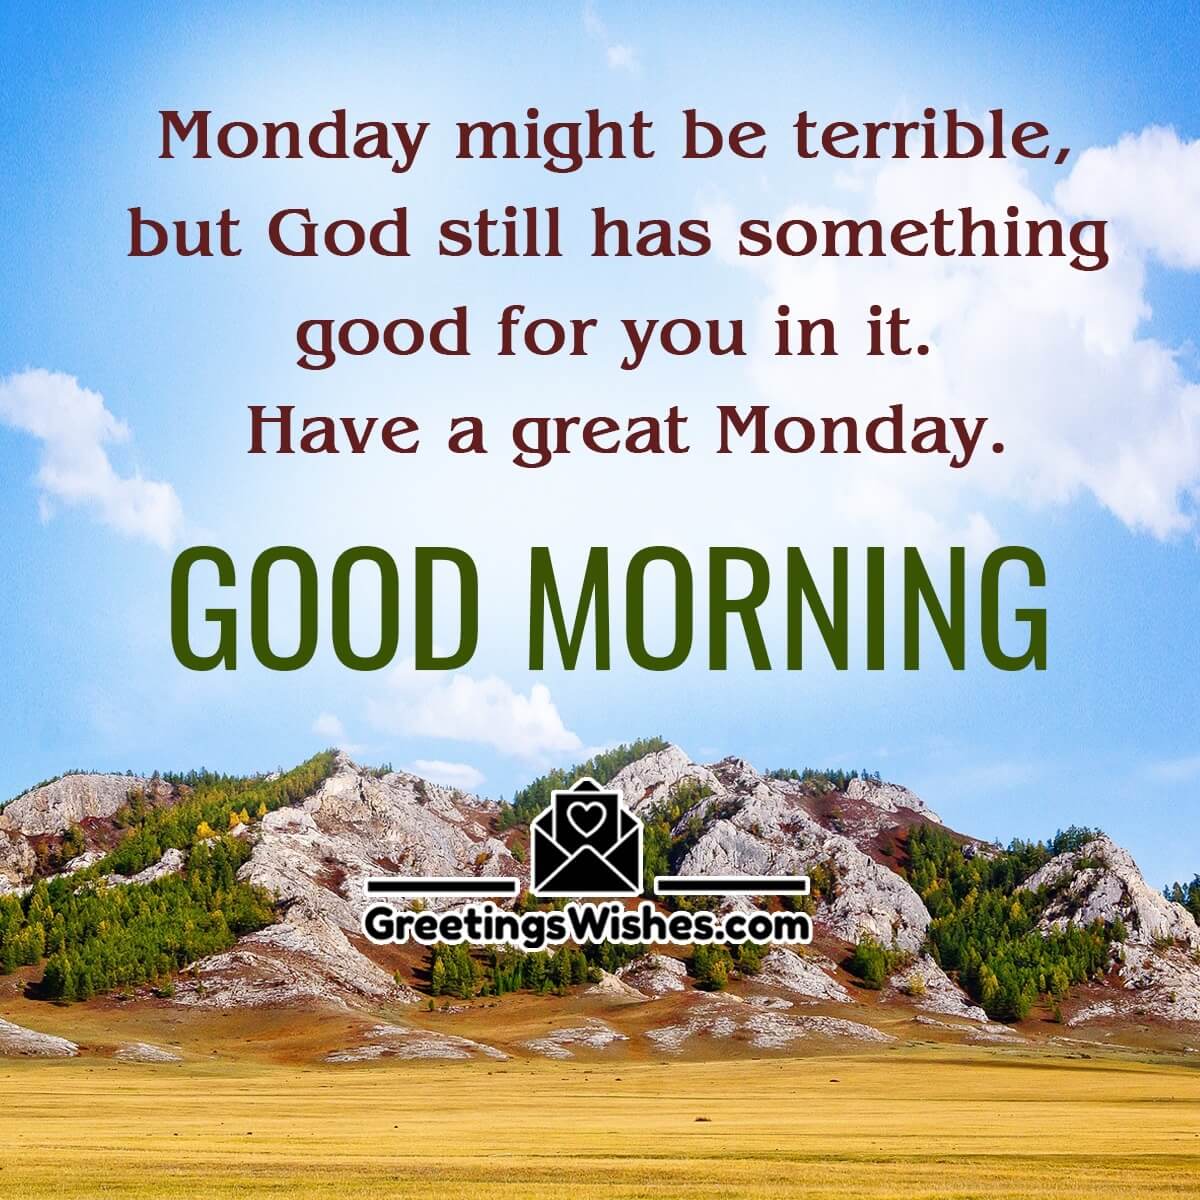 Monday Morning Wishes - Greetings Wishes